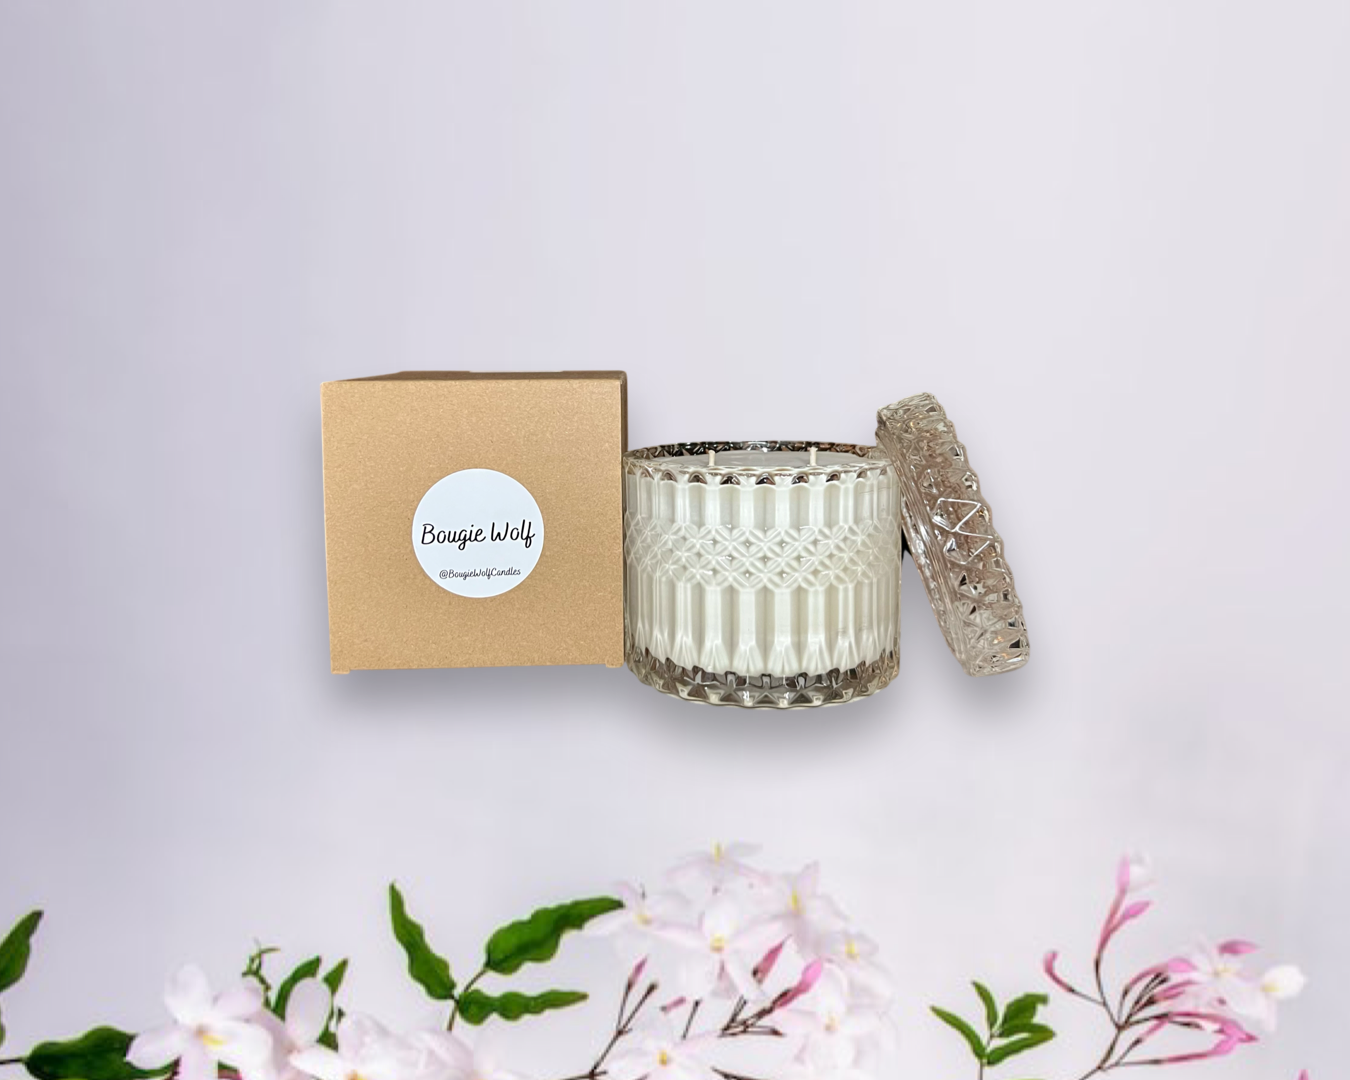 Premium Australian brand melbourne, deluxe soy candle Bougie Wolf Candles, light throw, cotton, crystal cut, long lasting,  best scent throw, mandala, Jasmine, Pear, Floral, Rose, Grapefruit, Coconut. mesmeric jasmine splash elegant fragrance scent throw light classy beautiful entrancing 